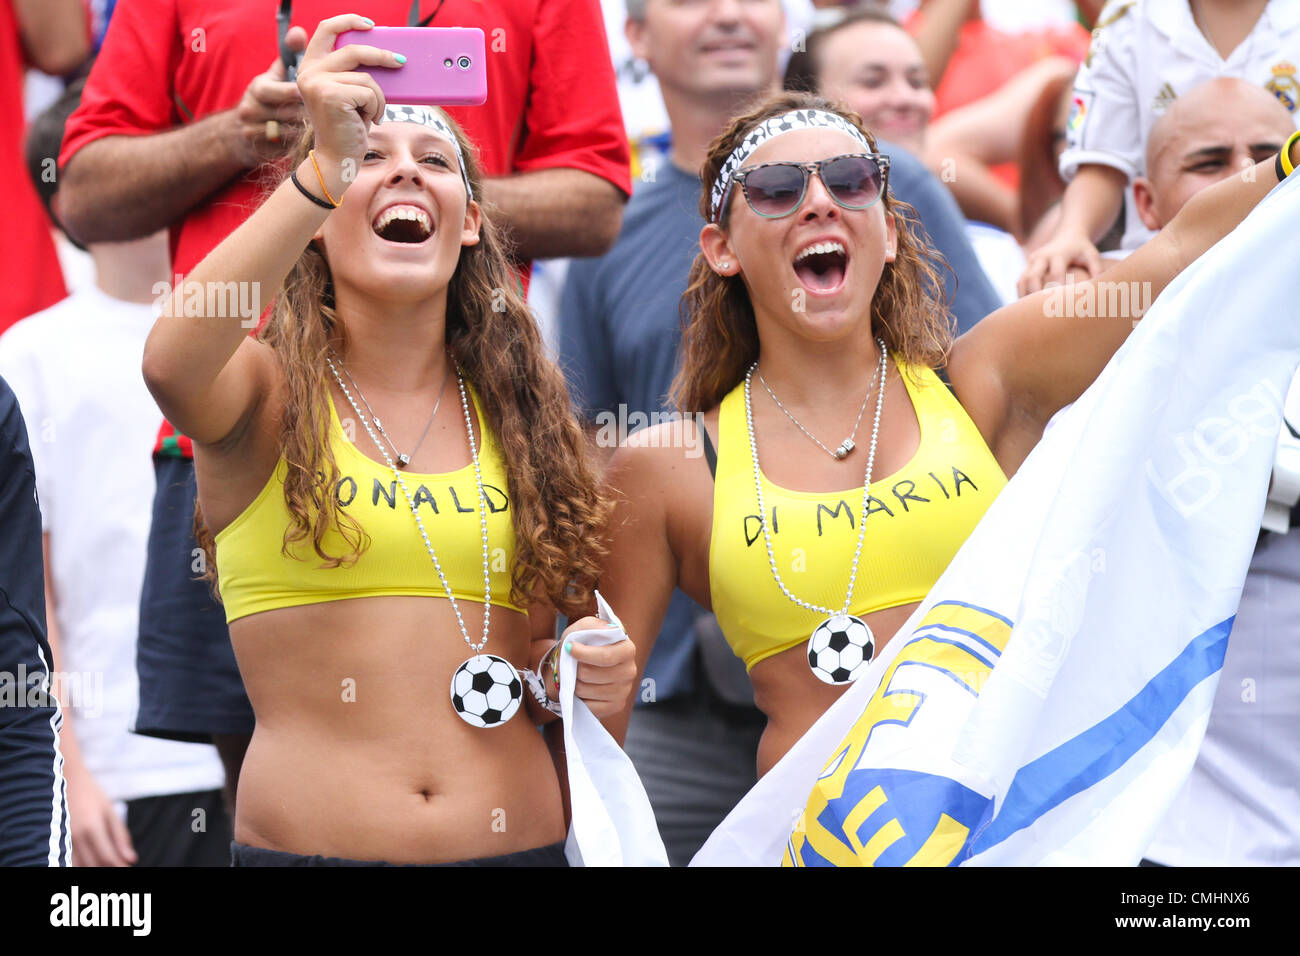 11.08.2012. Philadelphia, USA. Two pretty female Real Madrid fans in bikini  tops painted with Ronaldo and Di Maria cheer on their favorite team during  the World Football Challenge match between Real Madrid